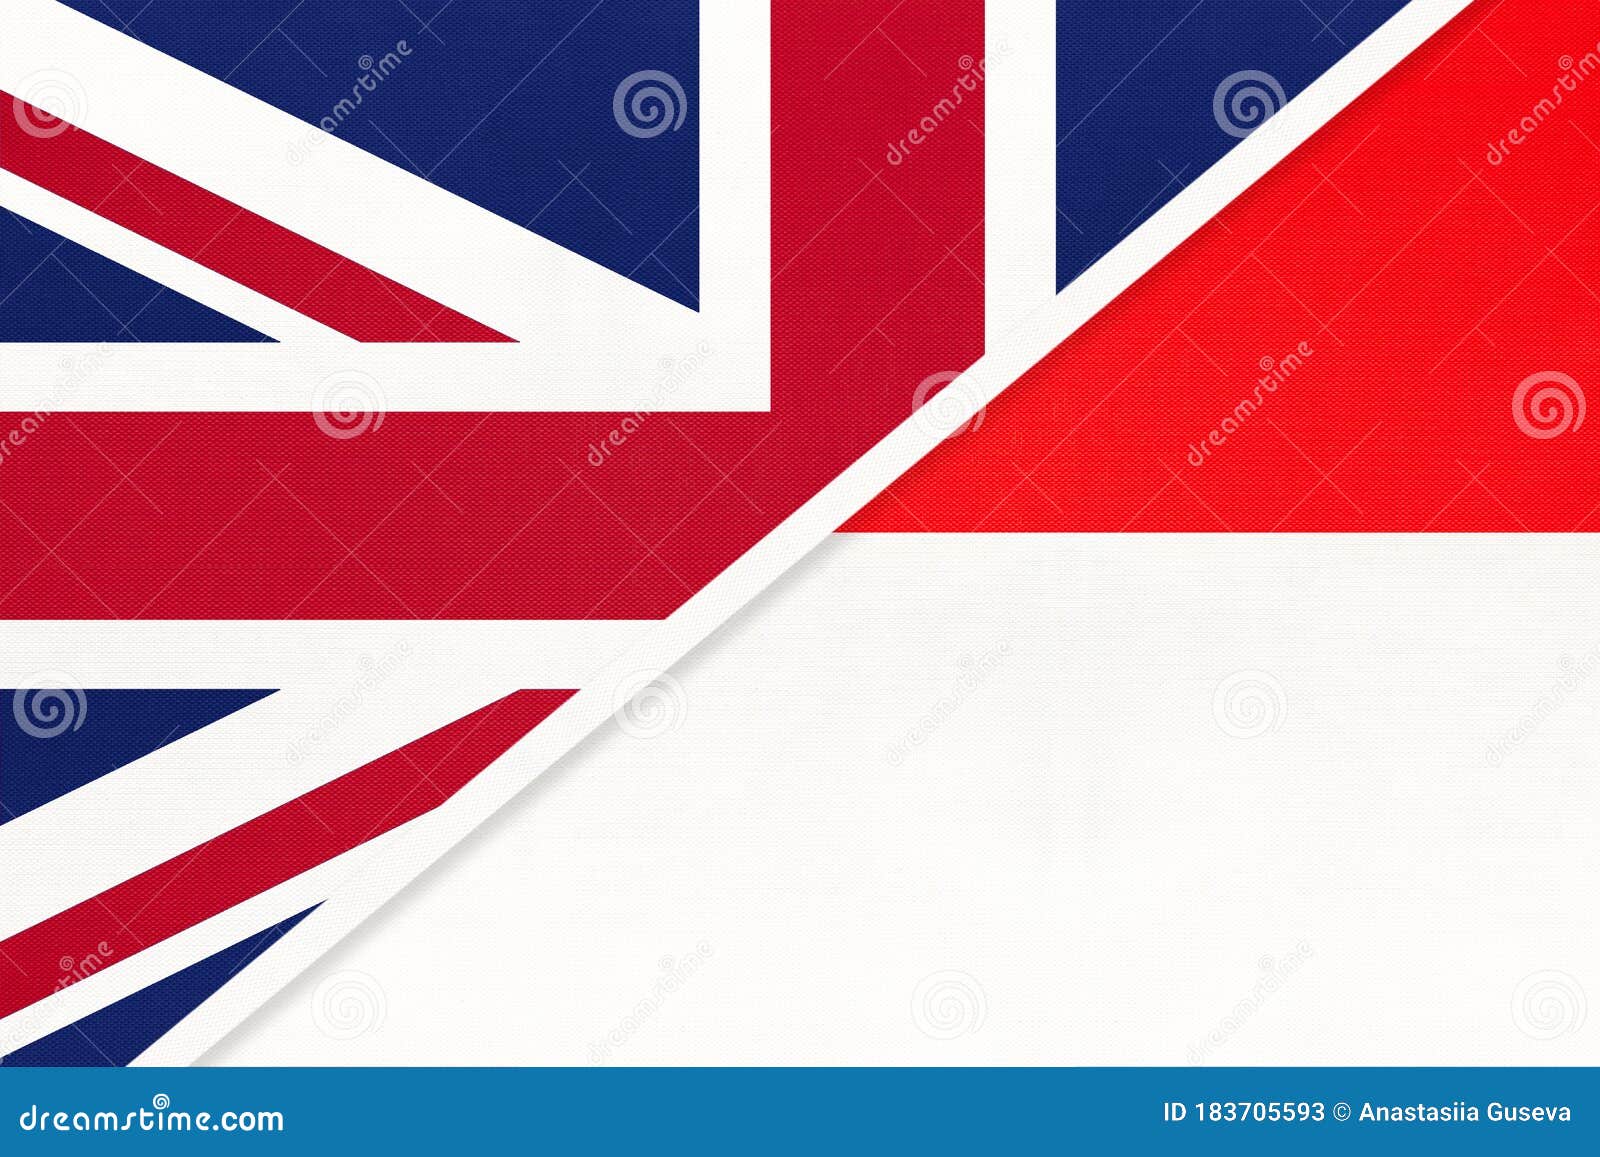 United Kingdom And Indonesia National Flag From Textile Relationship Between Two European And Asian Countries Stock Image Image Of Britain Indonesia